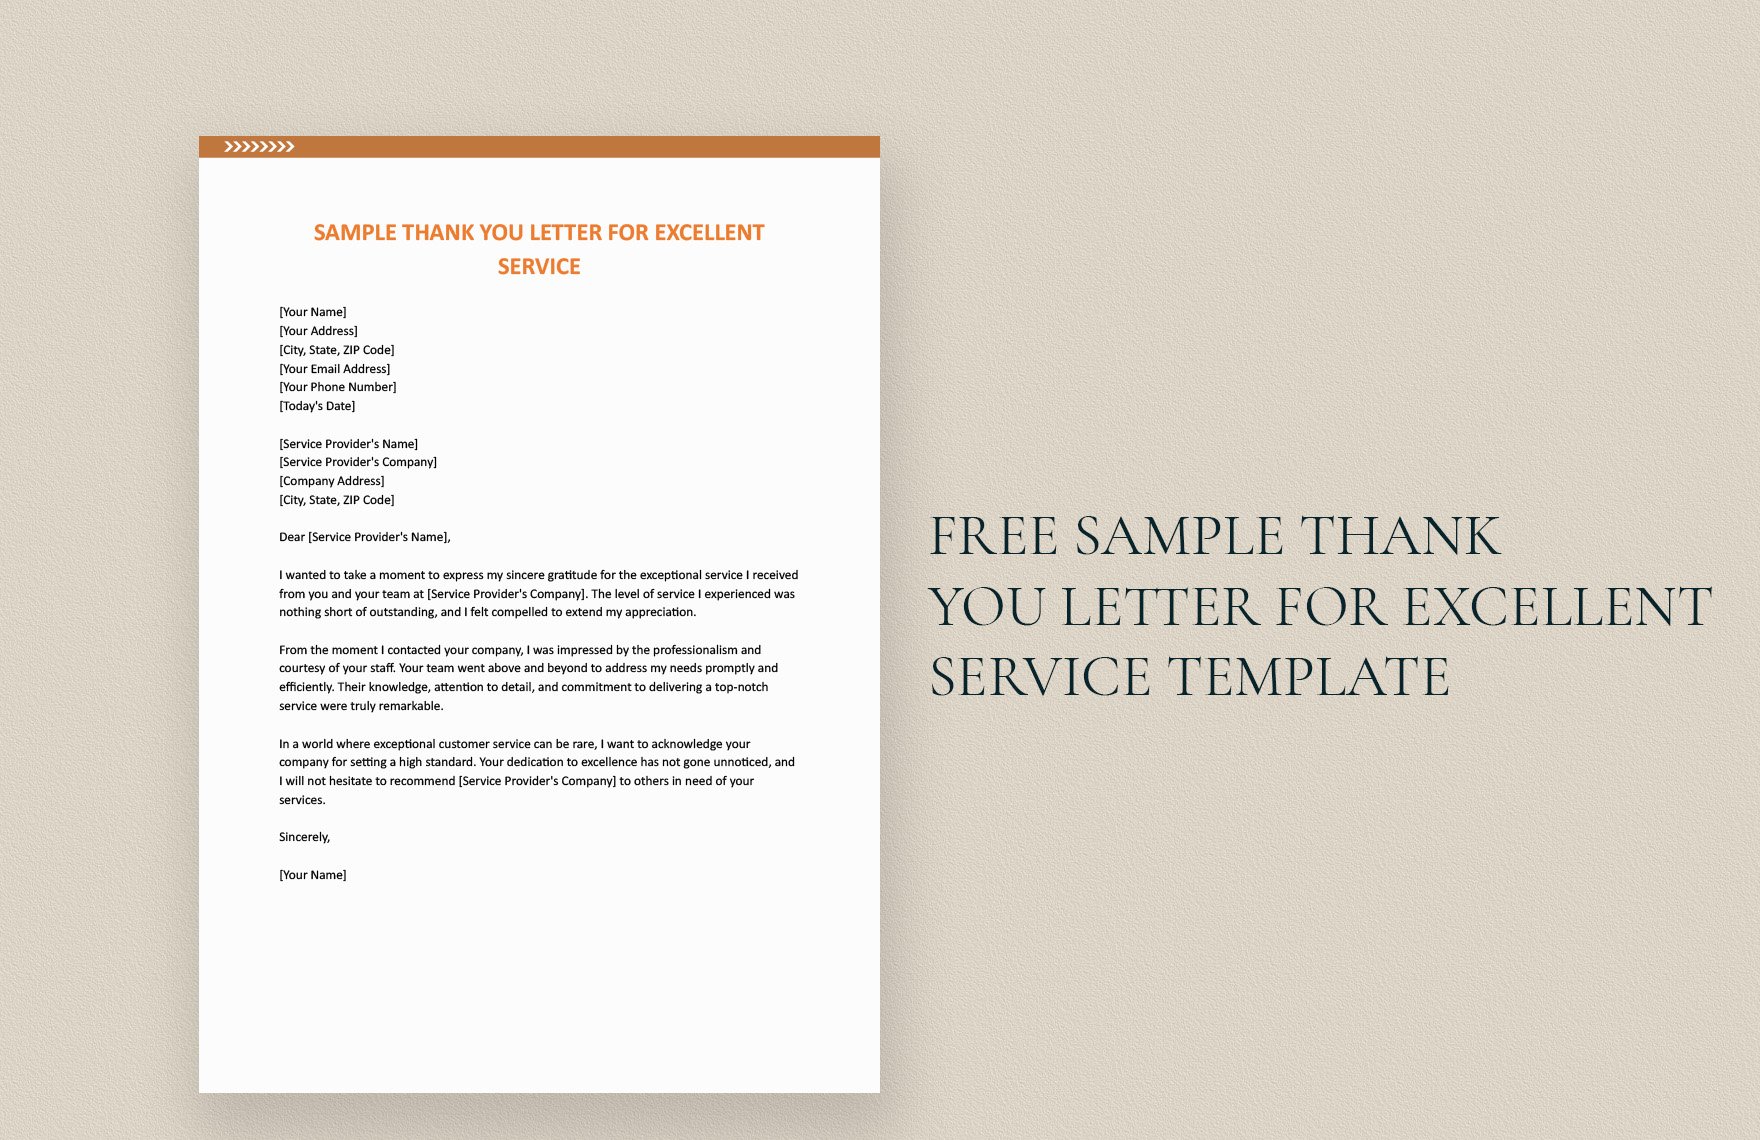 Sample Thank You Letter for Excellent Service Template